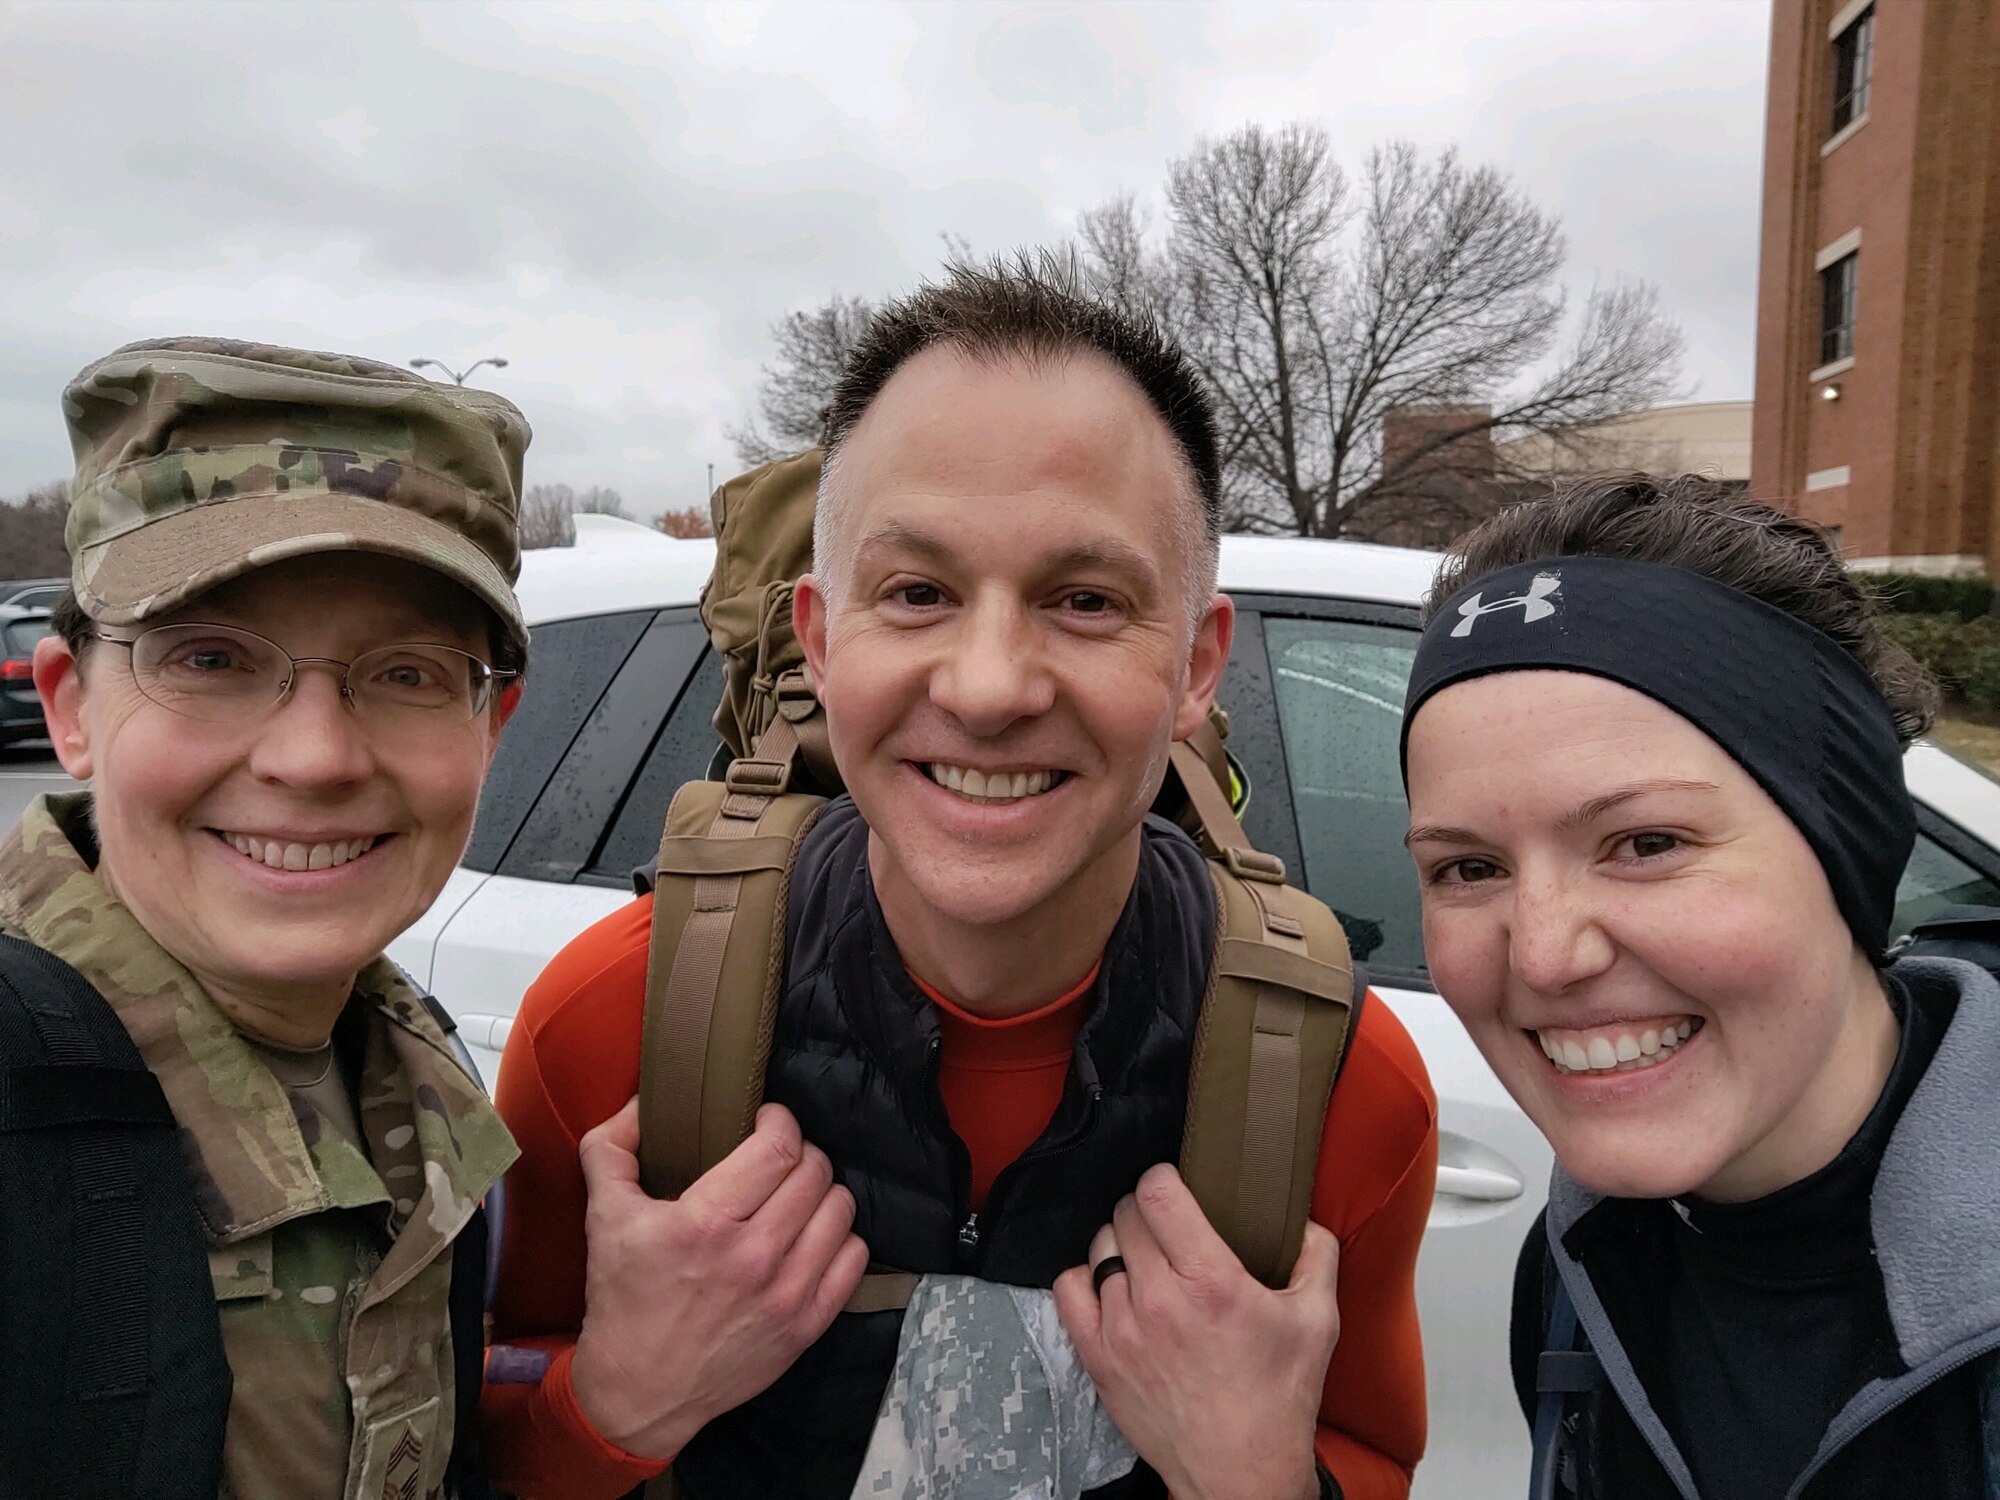 CMSgt Deborah Volker, SMSgt Bradley Bennet, and TSgt Jilian McGreen outside the USAF Band squadron having completed a training ruck on Joint Base Anacostia-Bolling